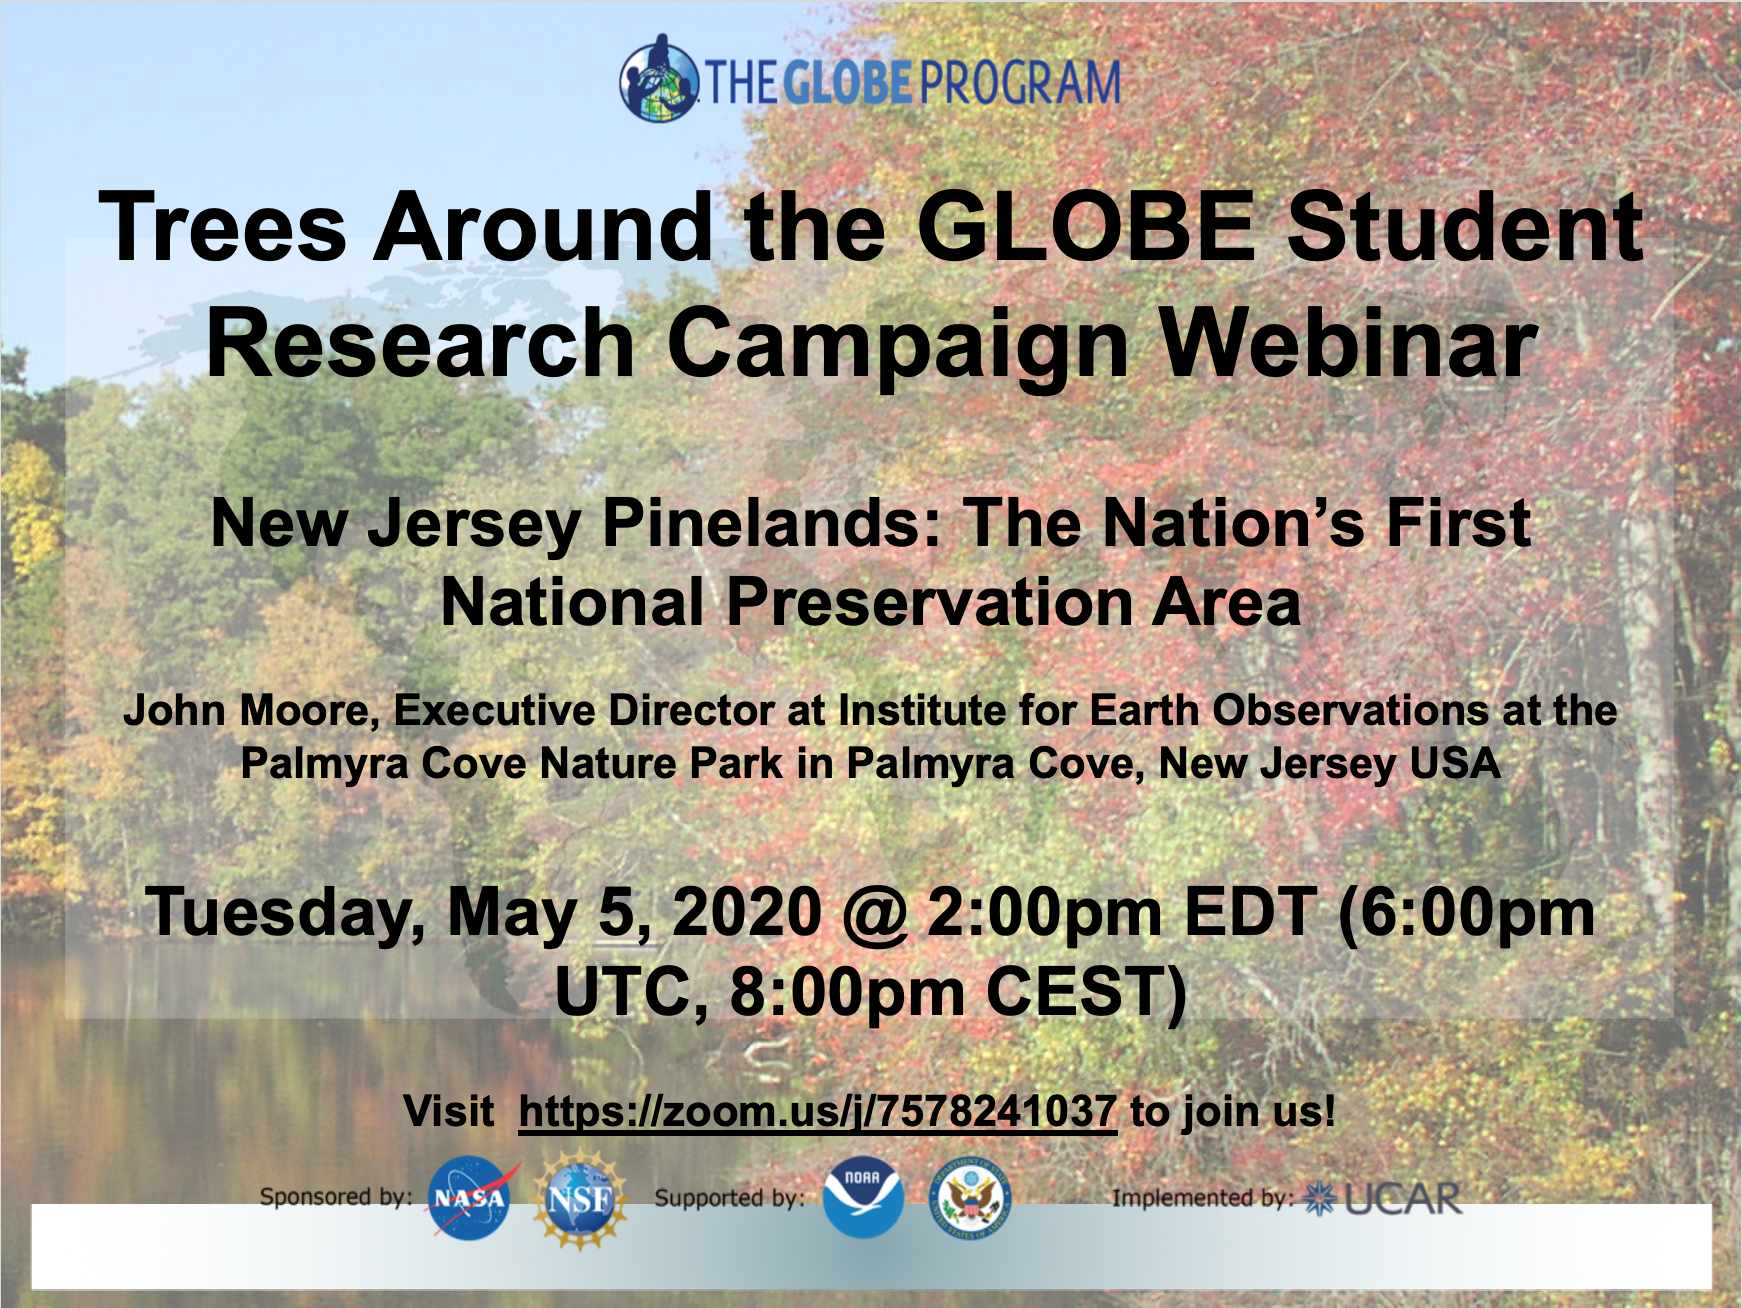 Trees Around the GLOBE Student Research Campaign 05 May webinar shareable